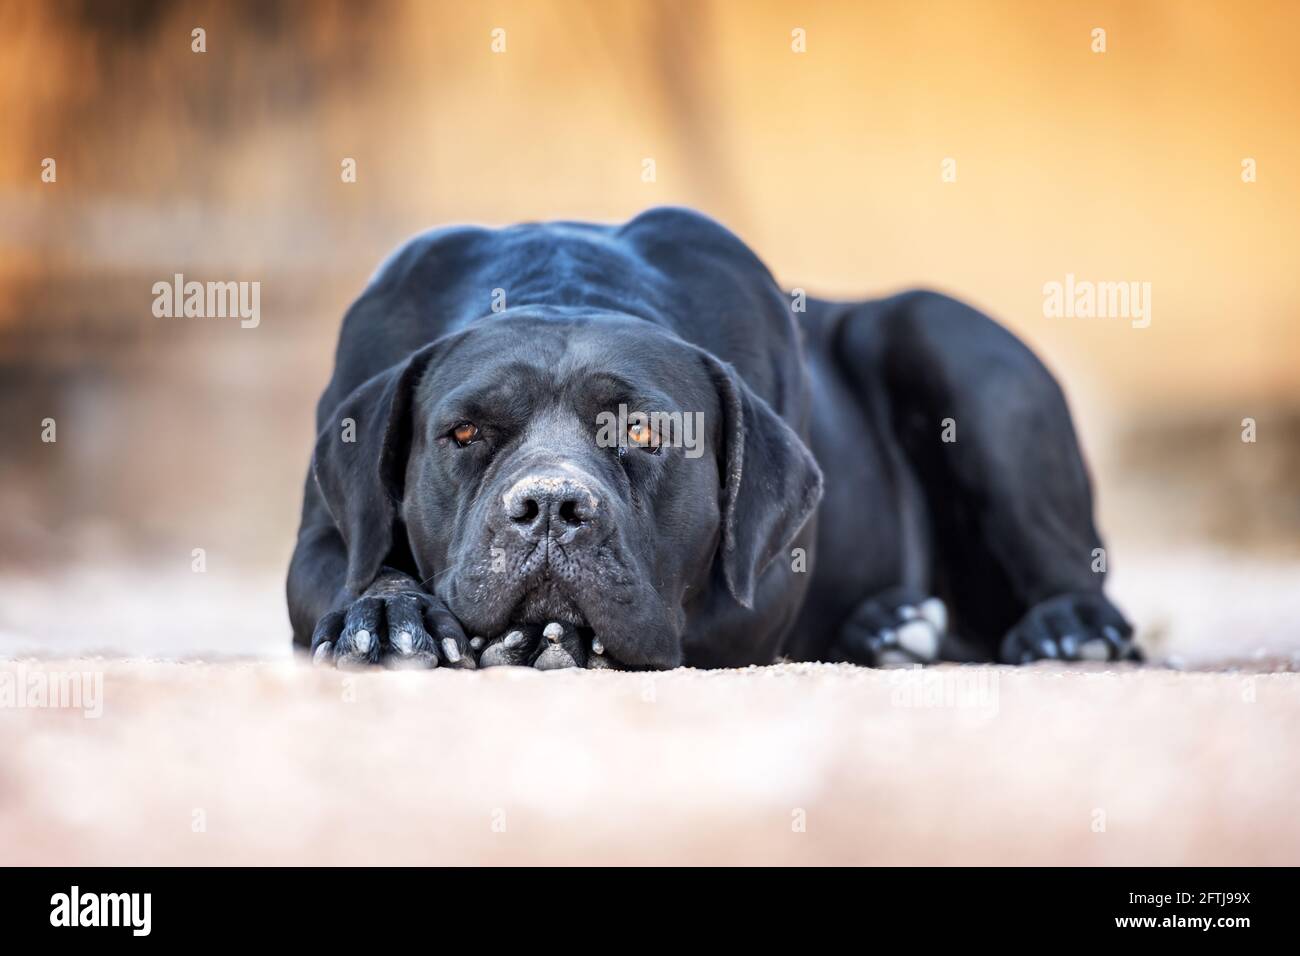 Black dog breed Cane Corso lies on the ground Stock Photo